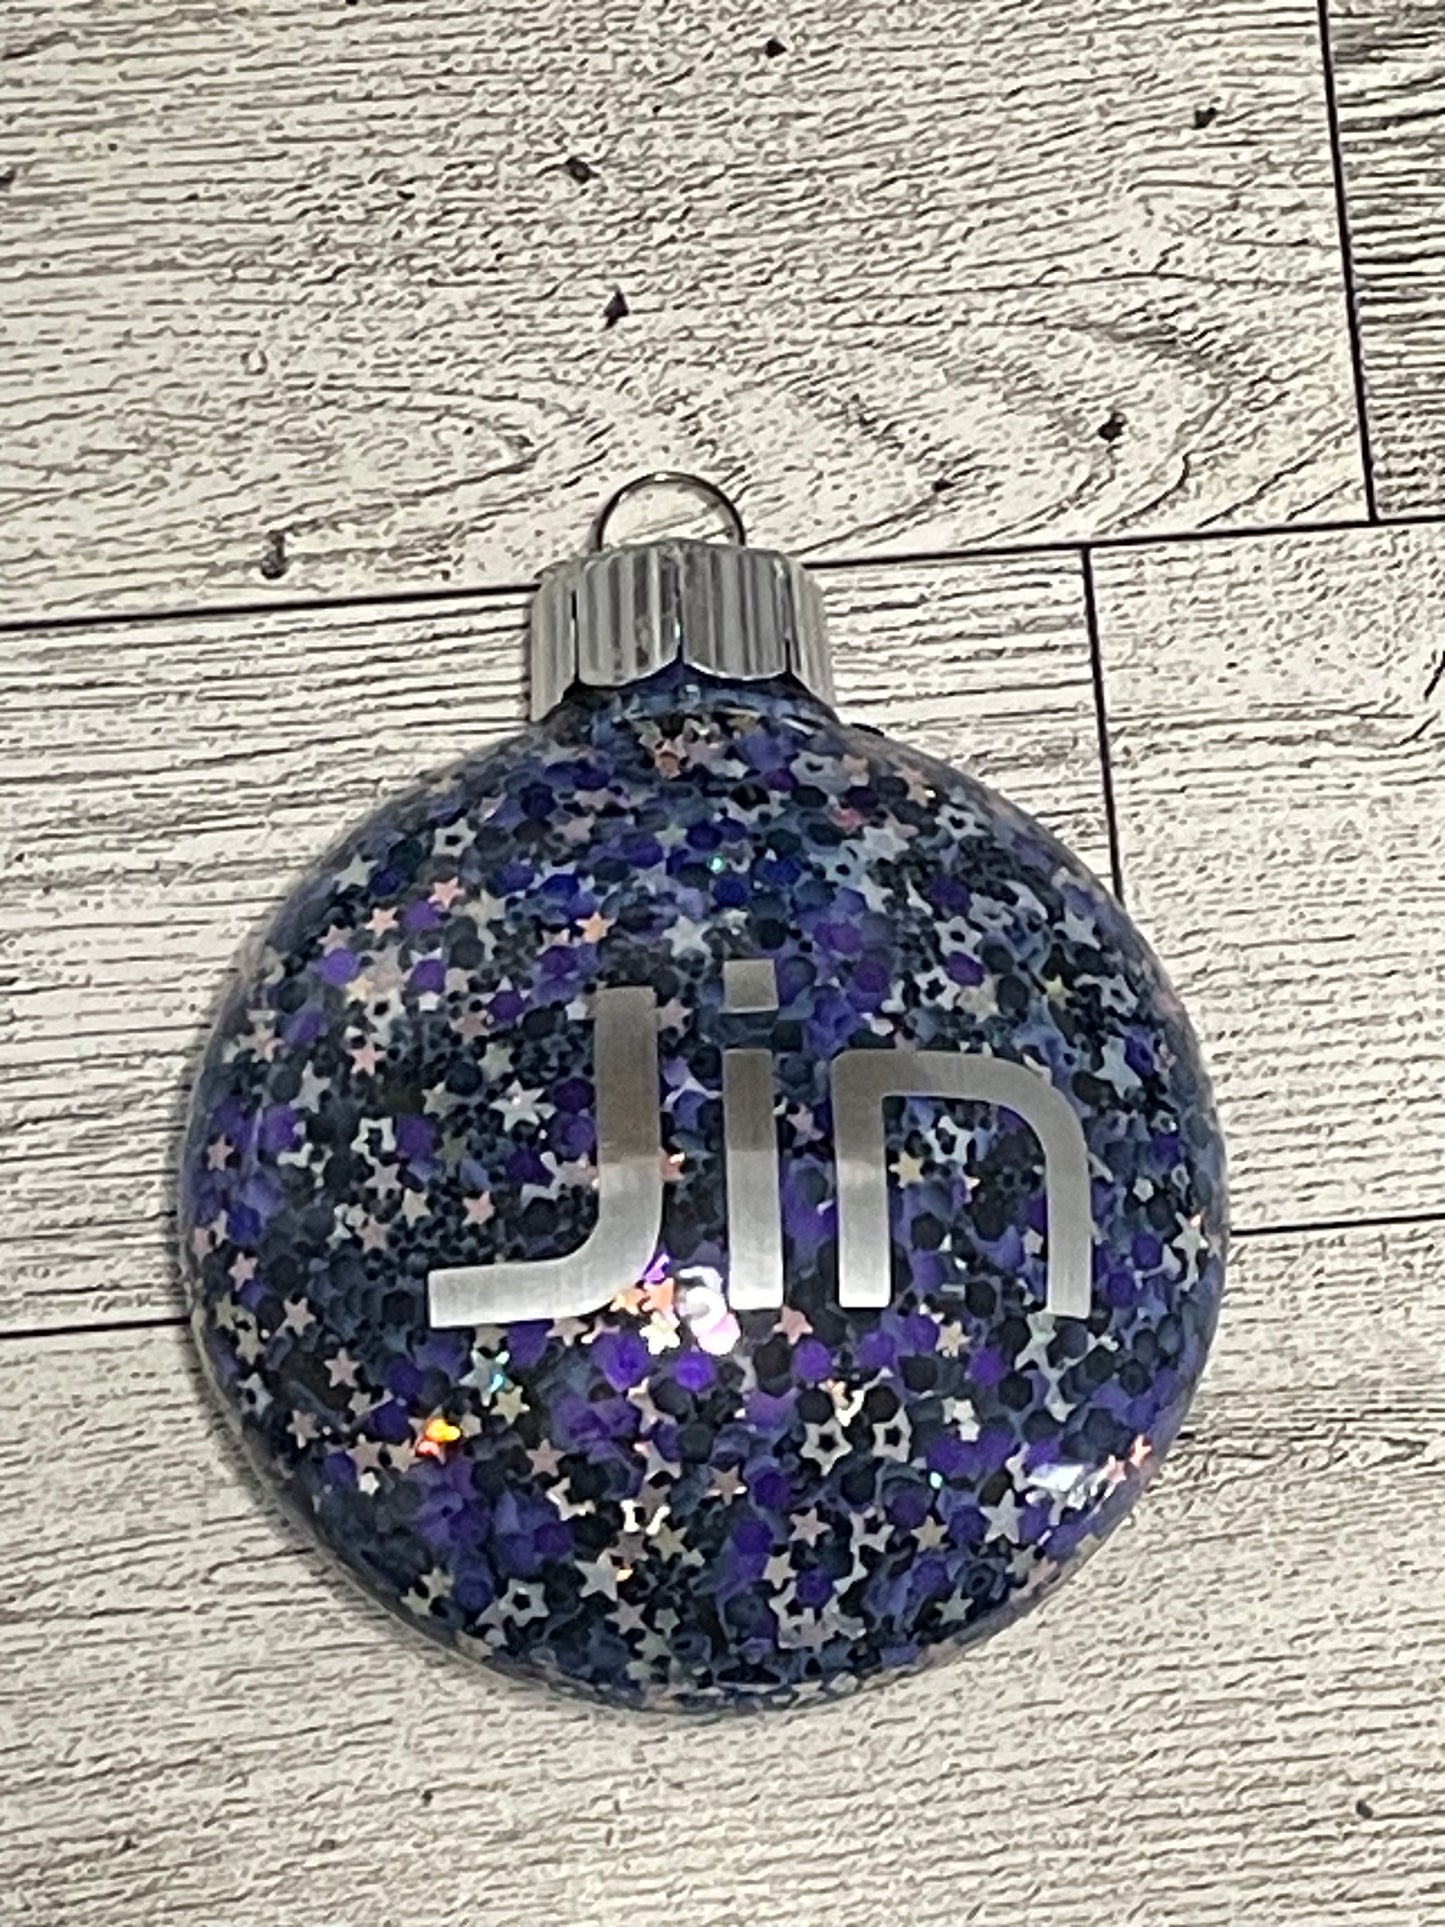 The Astronaut inspired Ornament